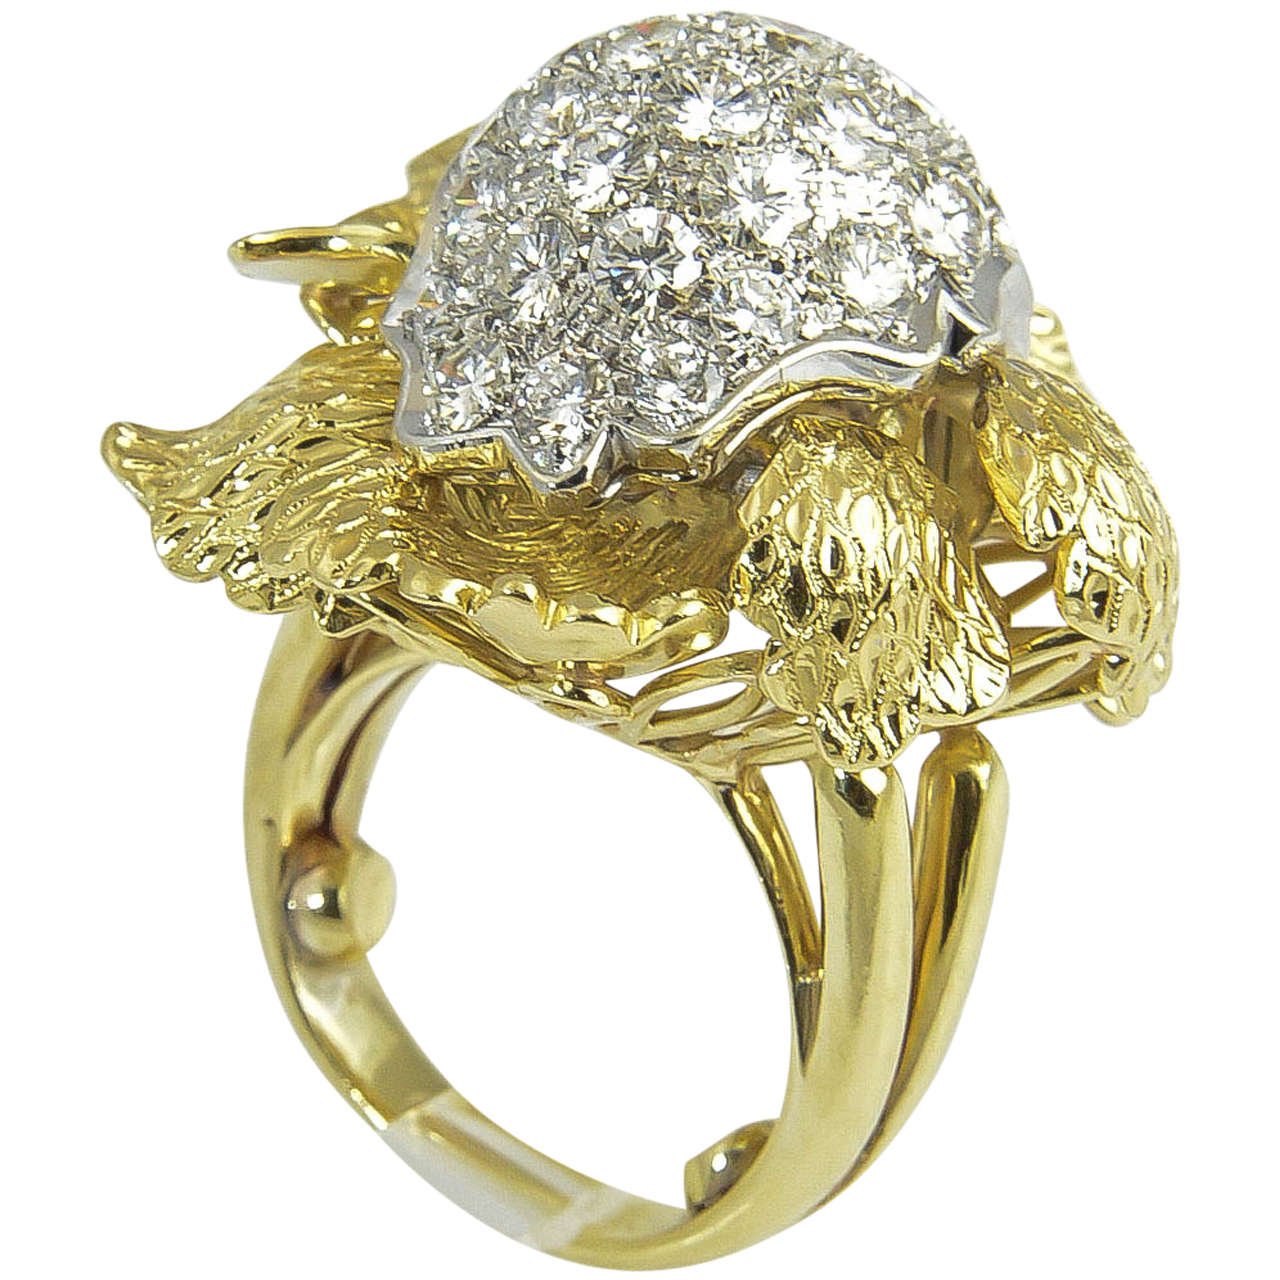 Impressive Ring with 2.25c atw. of beautiful diamonds set among textured 18k yellow gold petals.

US size 6 (it might a tiny bit off because of the balls to keep it from flipping)  It can be sized.